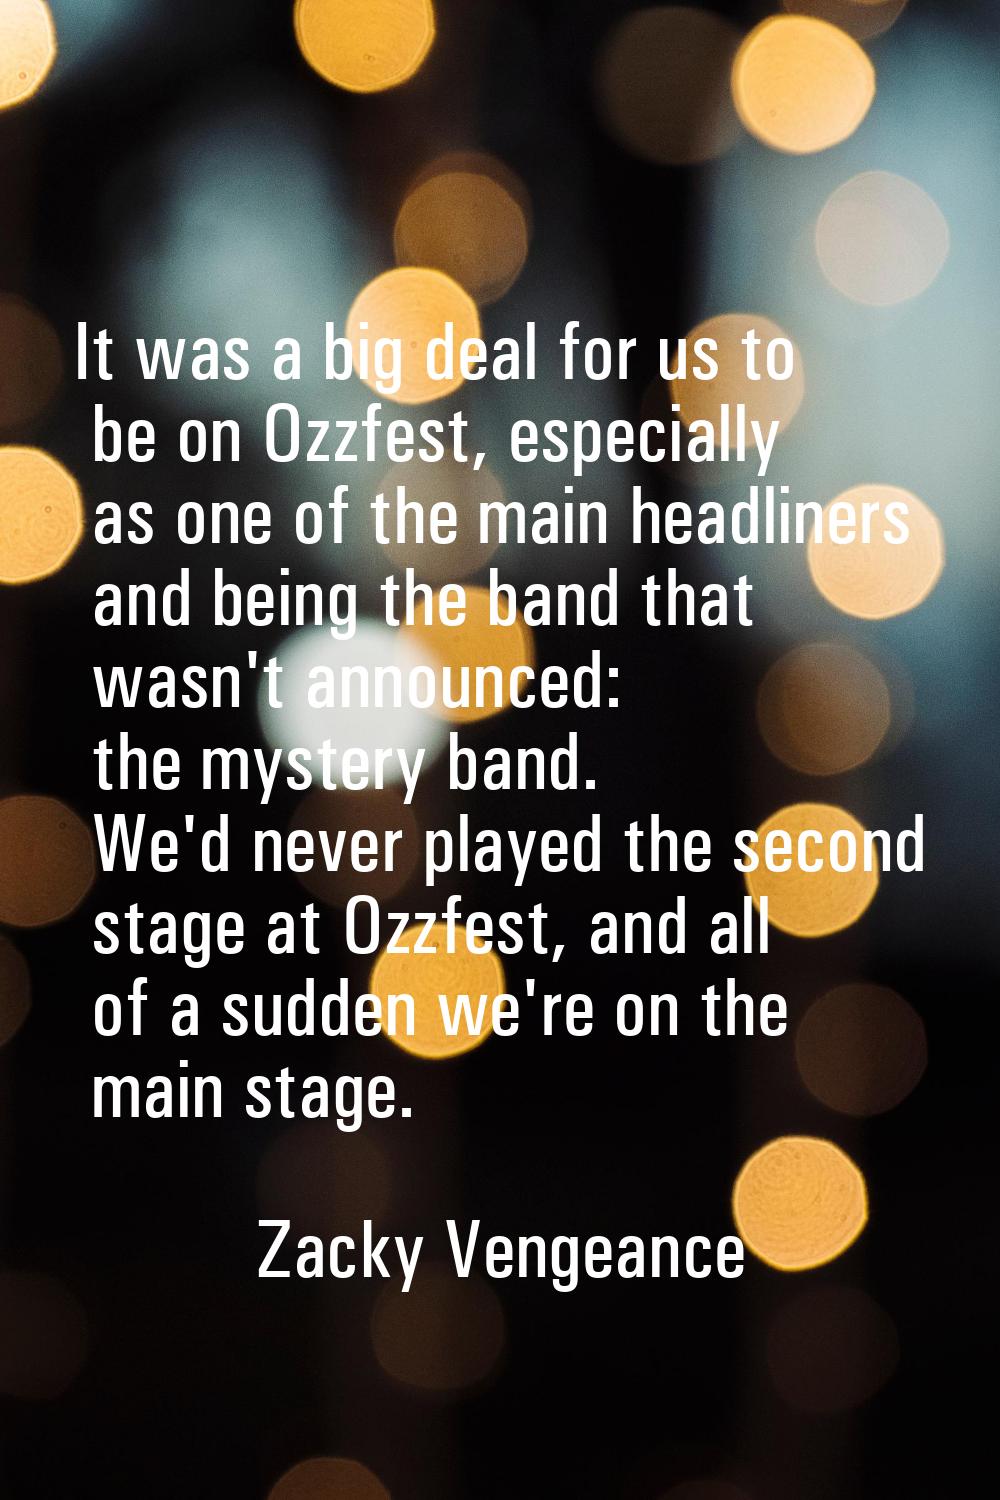 It was a big deal for us to be on Ozzfest, especially as one of the main headliners and being the b